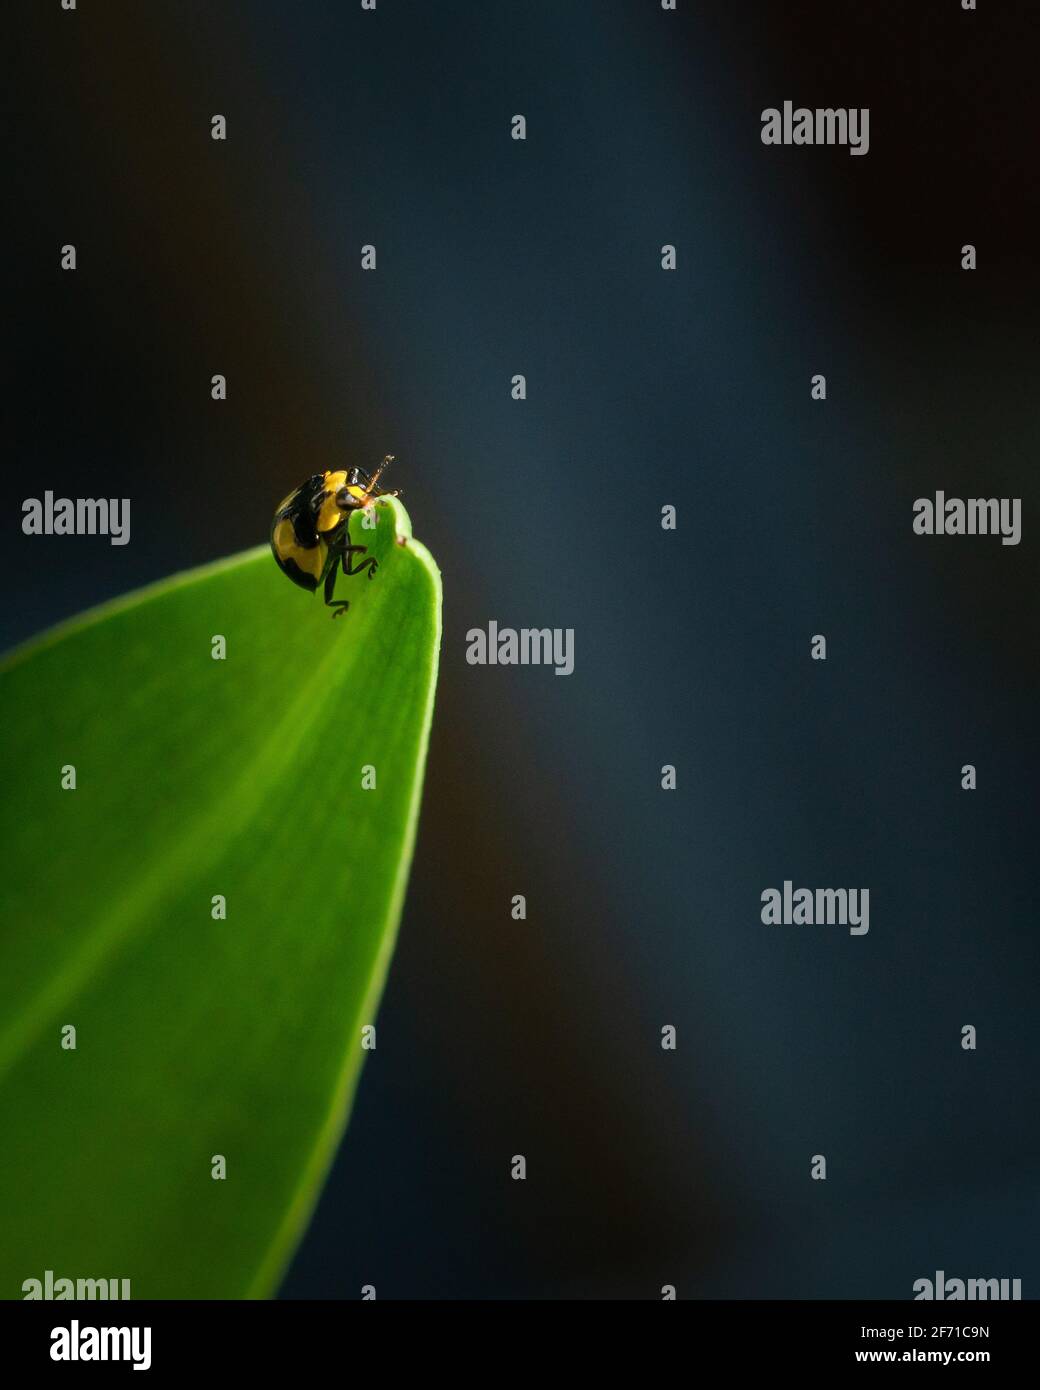 Shiny yellow beetle with batman design black spots on its back crawling up the leaf, vertical format. Stock Photo